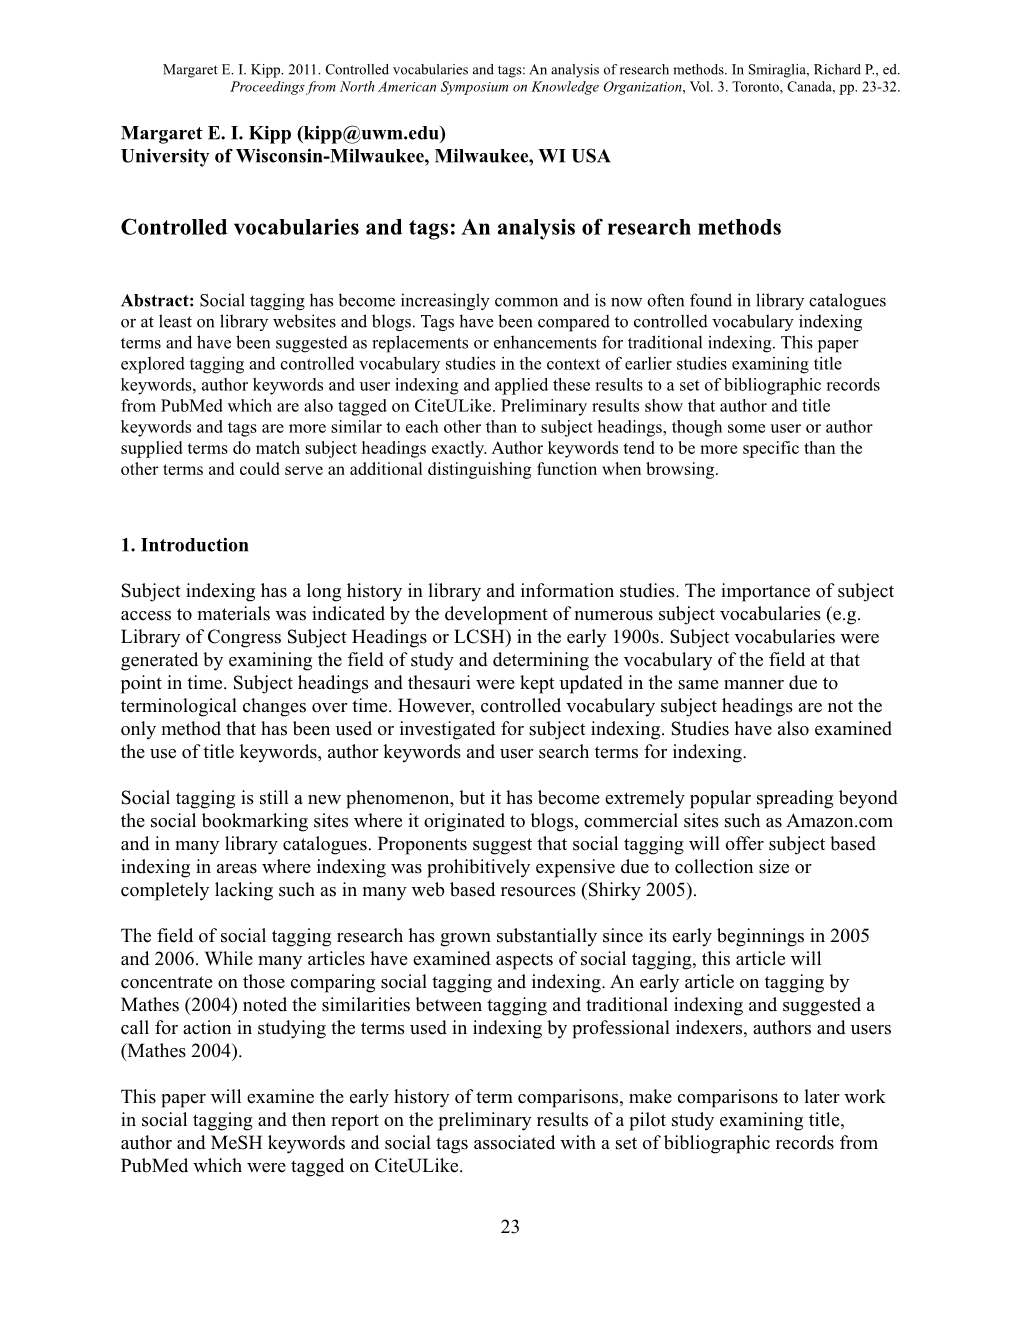 Controlled Vocabularies and Tags: an Analysis of Research Methods